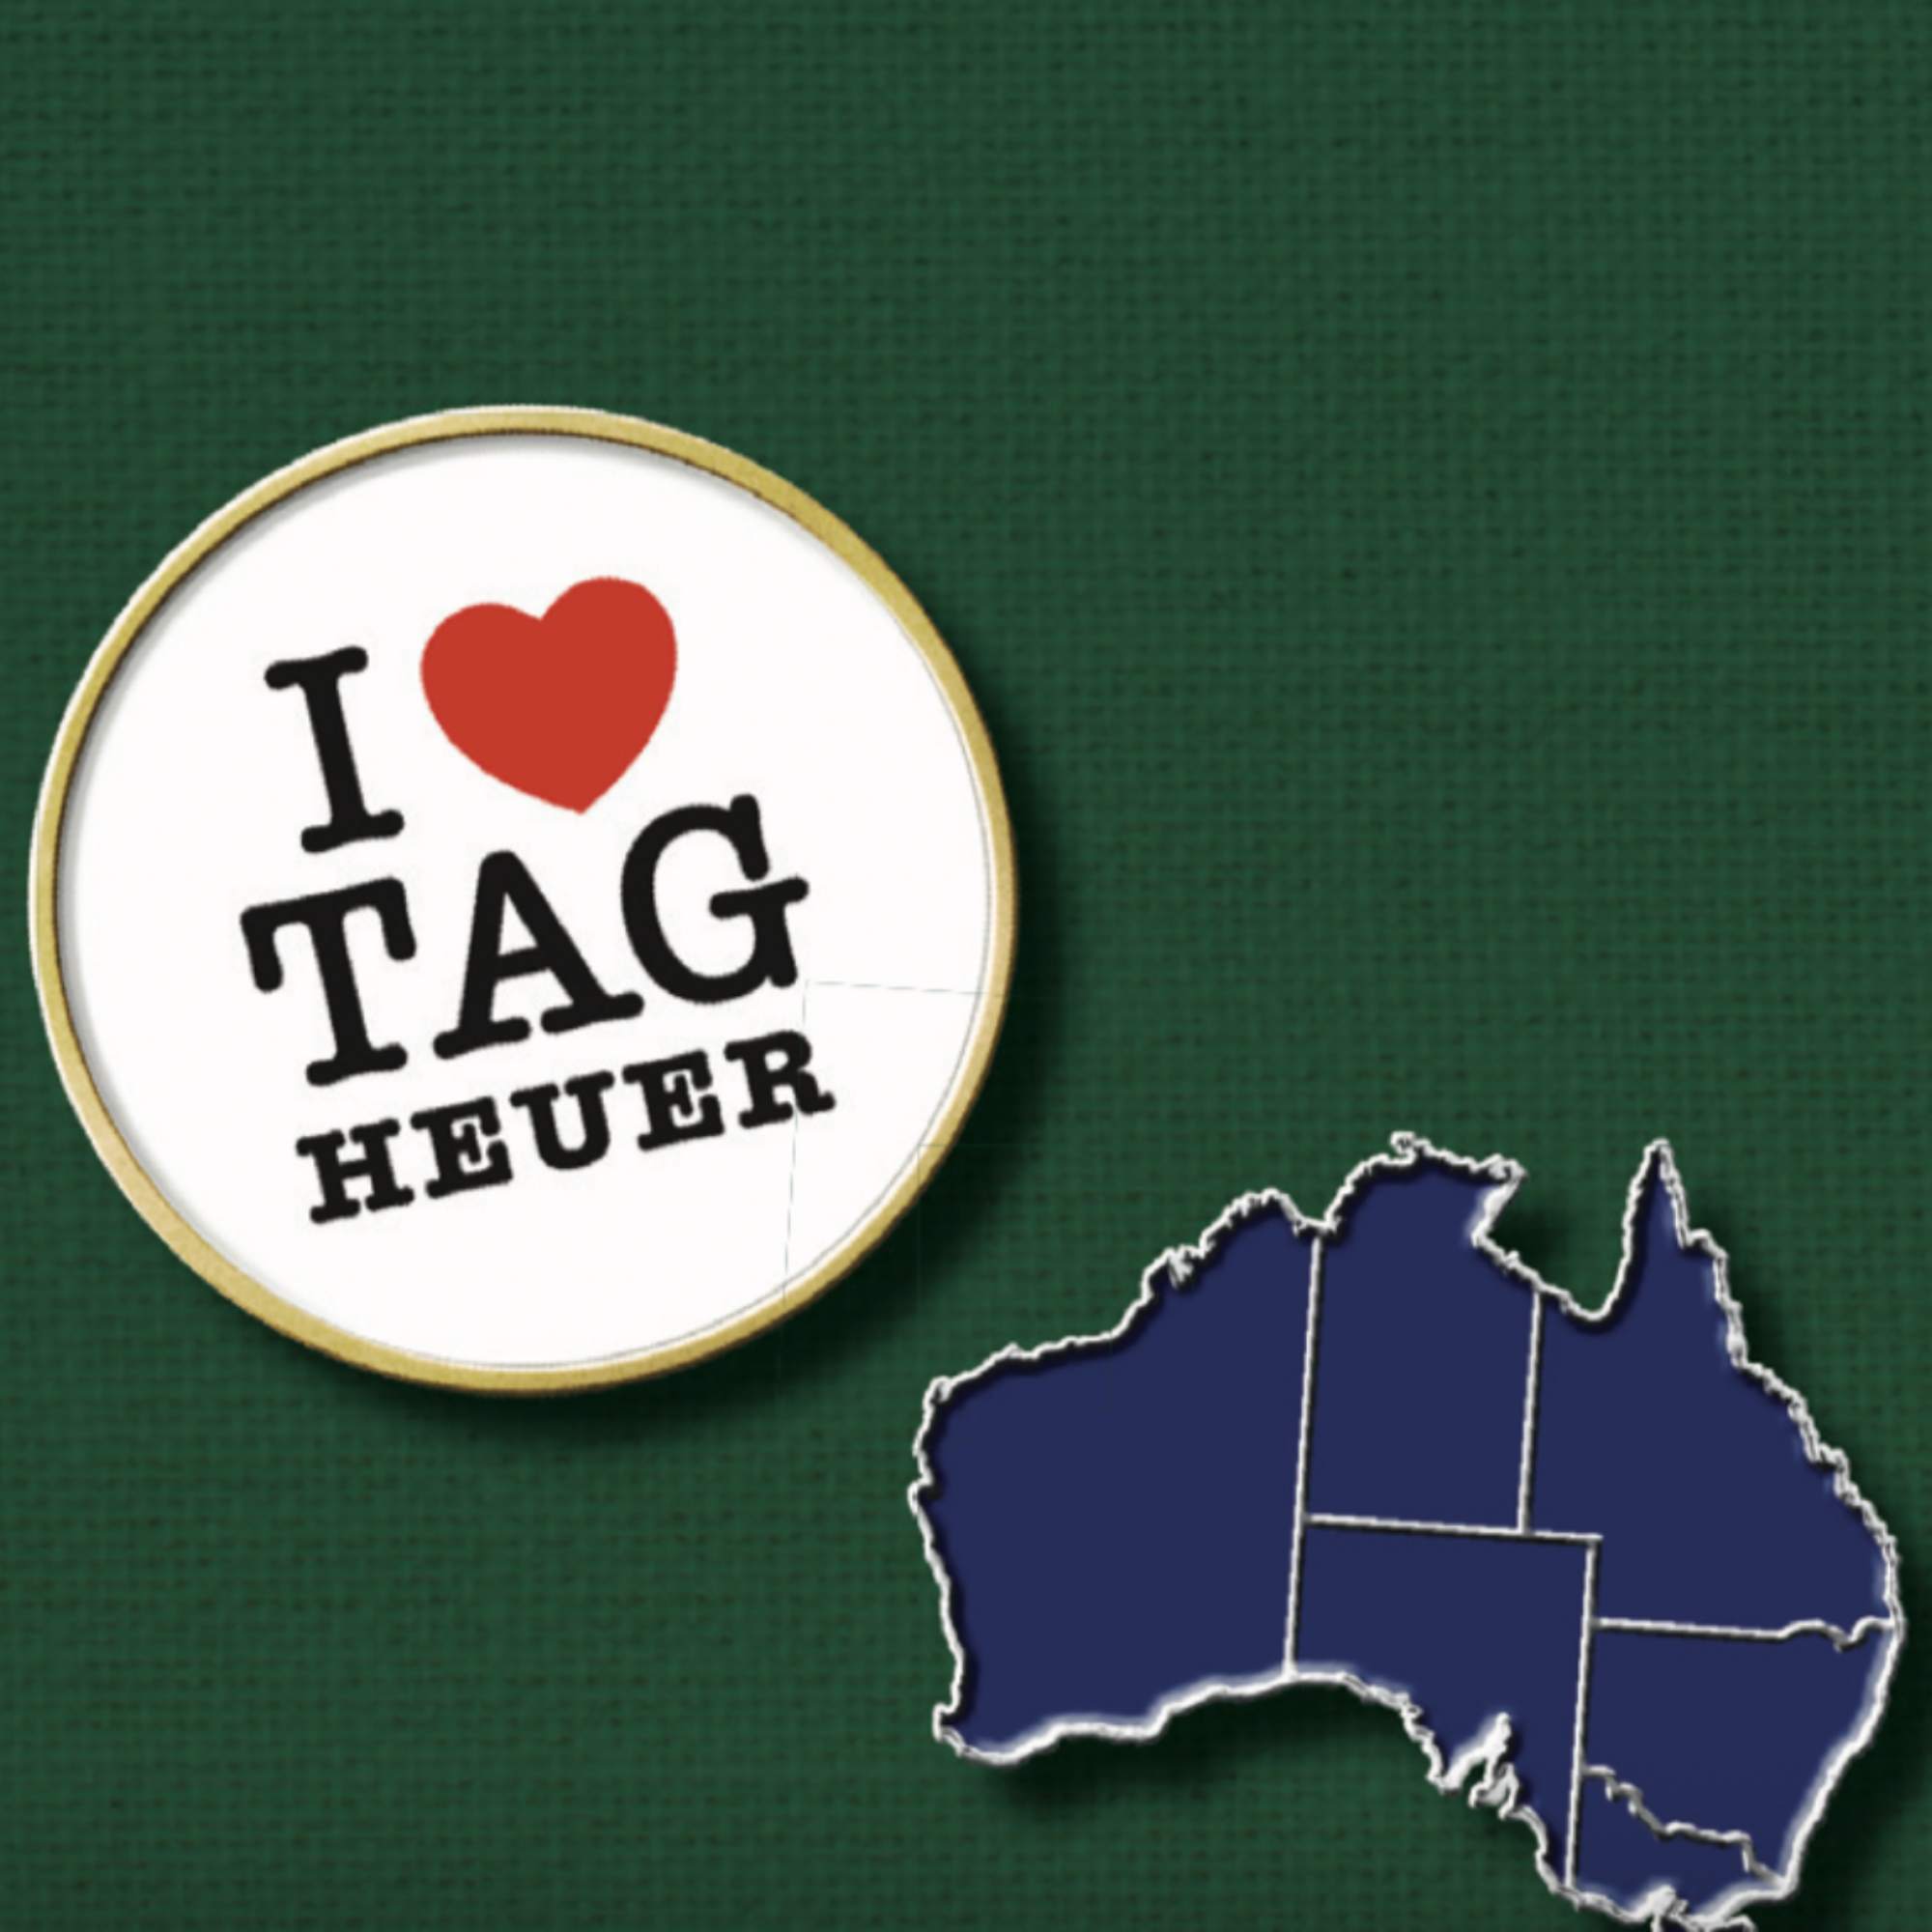 How Australia fell in love with TAG Heuer